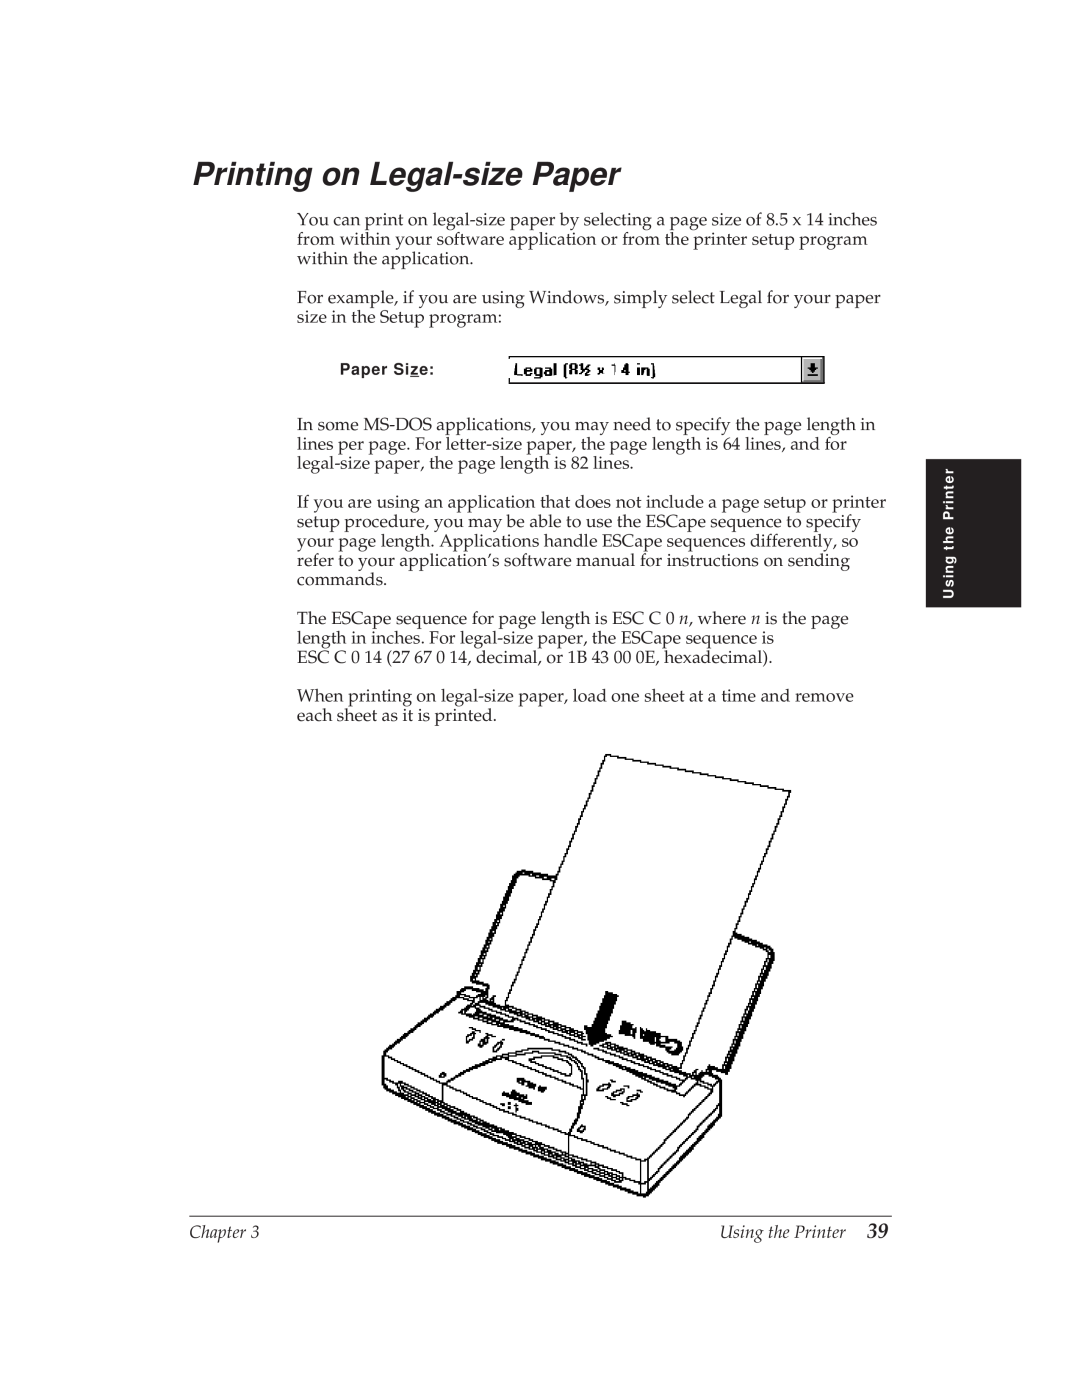 Canon BJ-30 manual Printing on Legal-size Paper 